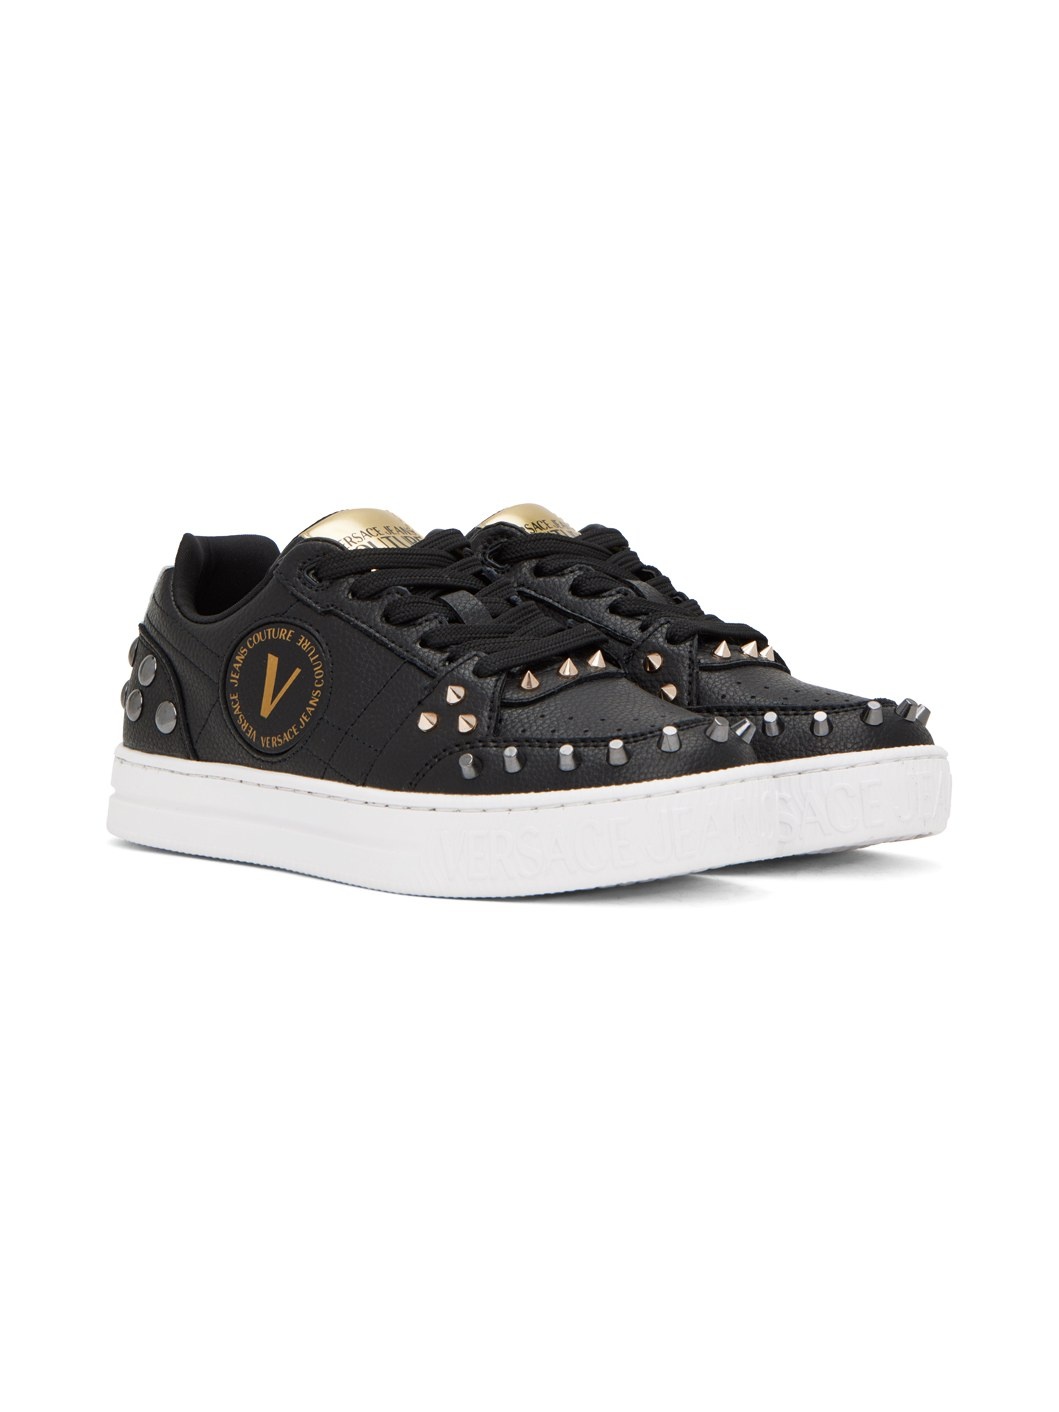 Black Court 88 Spiked Sneakers - 4